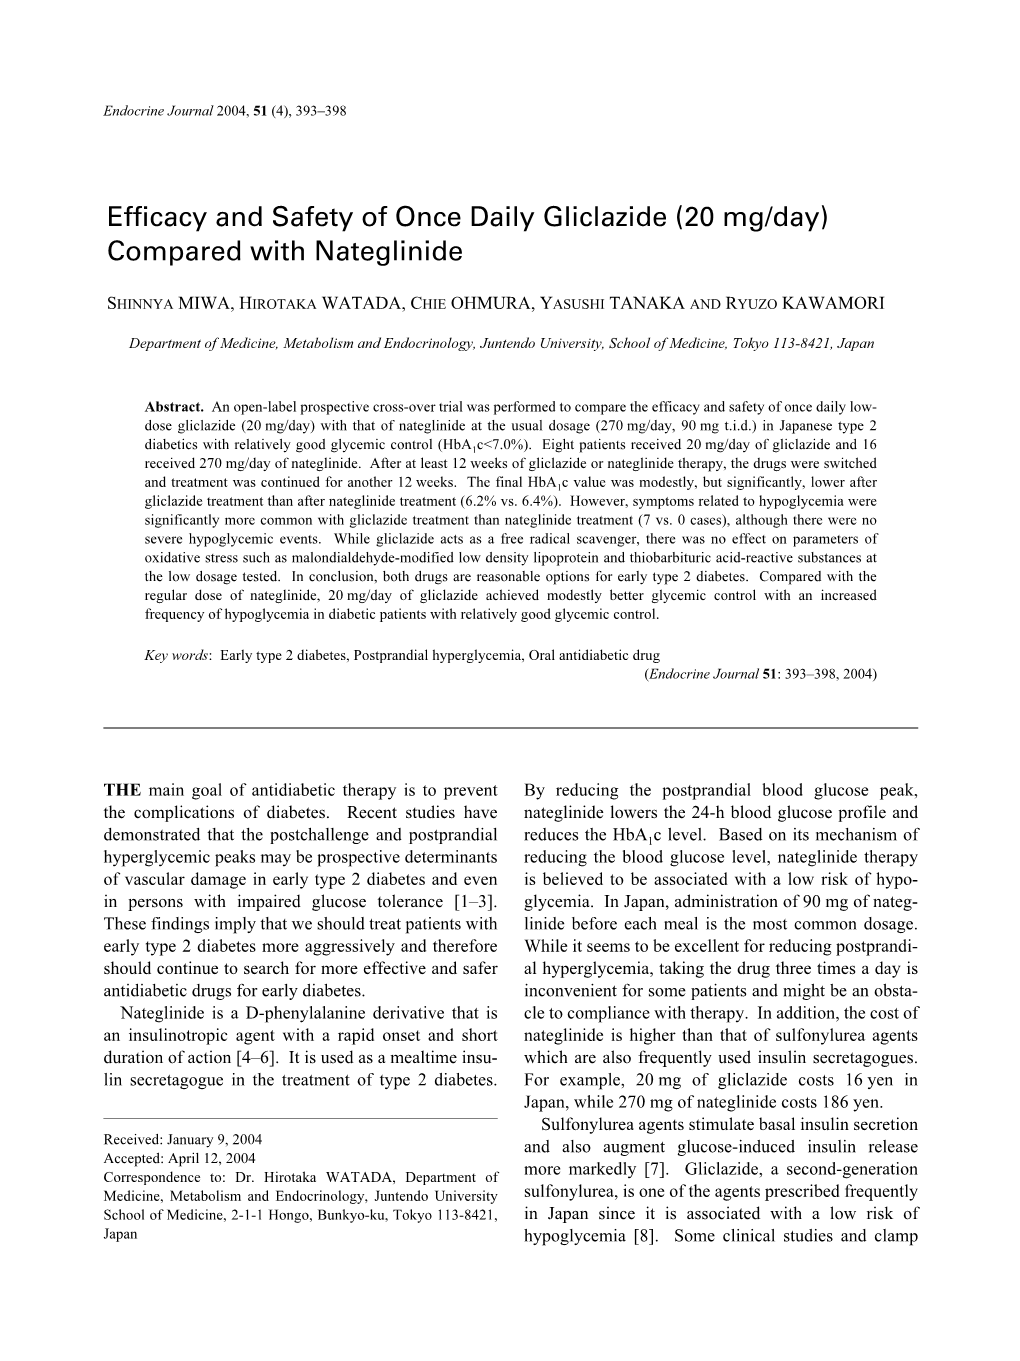 Efficacy and Safety of Once Daily Gliclazide (20 Mg/Day) Compared with Nateglinide